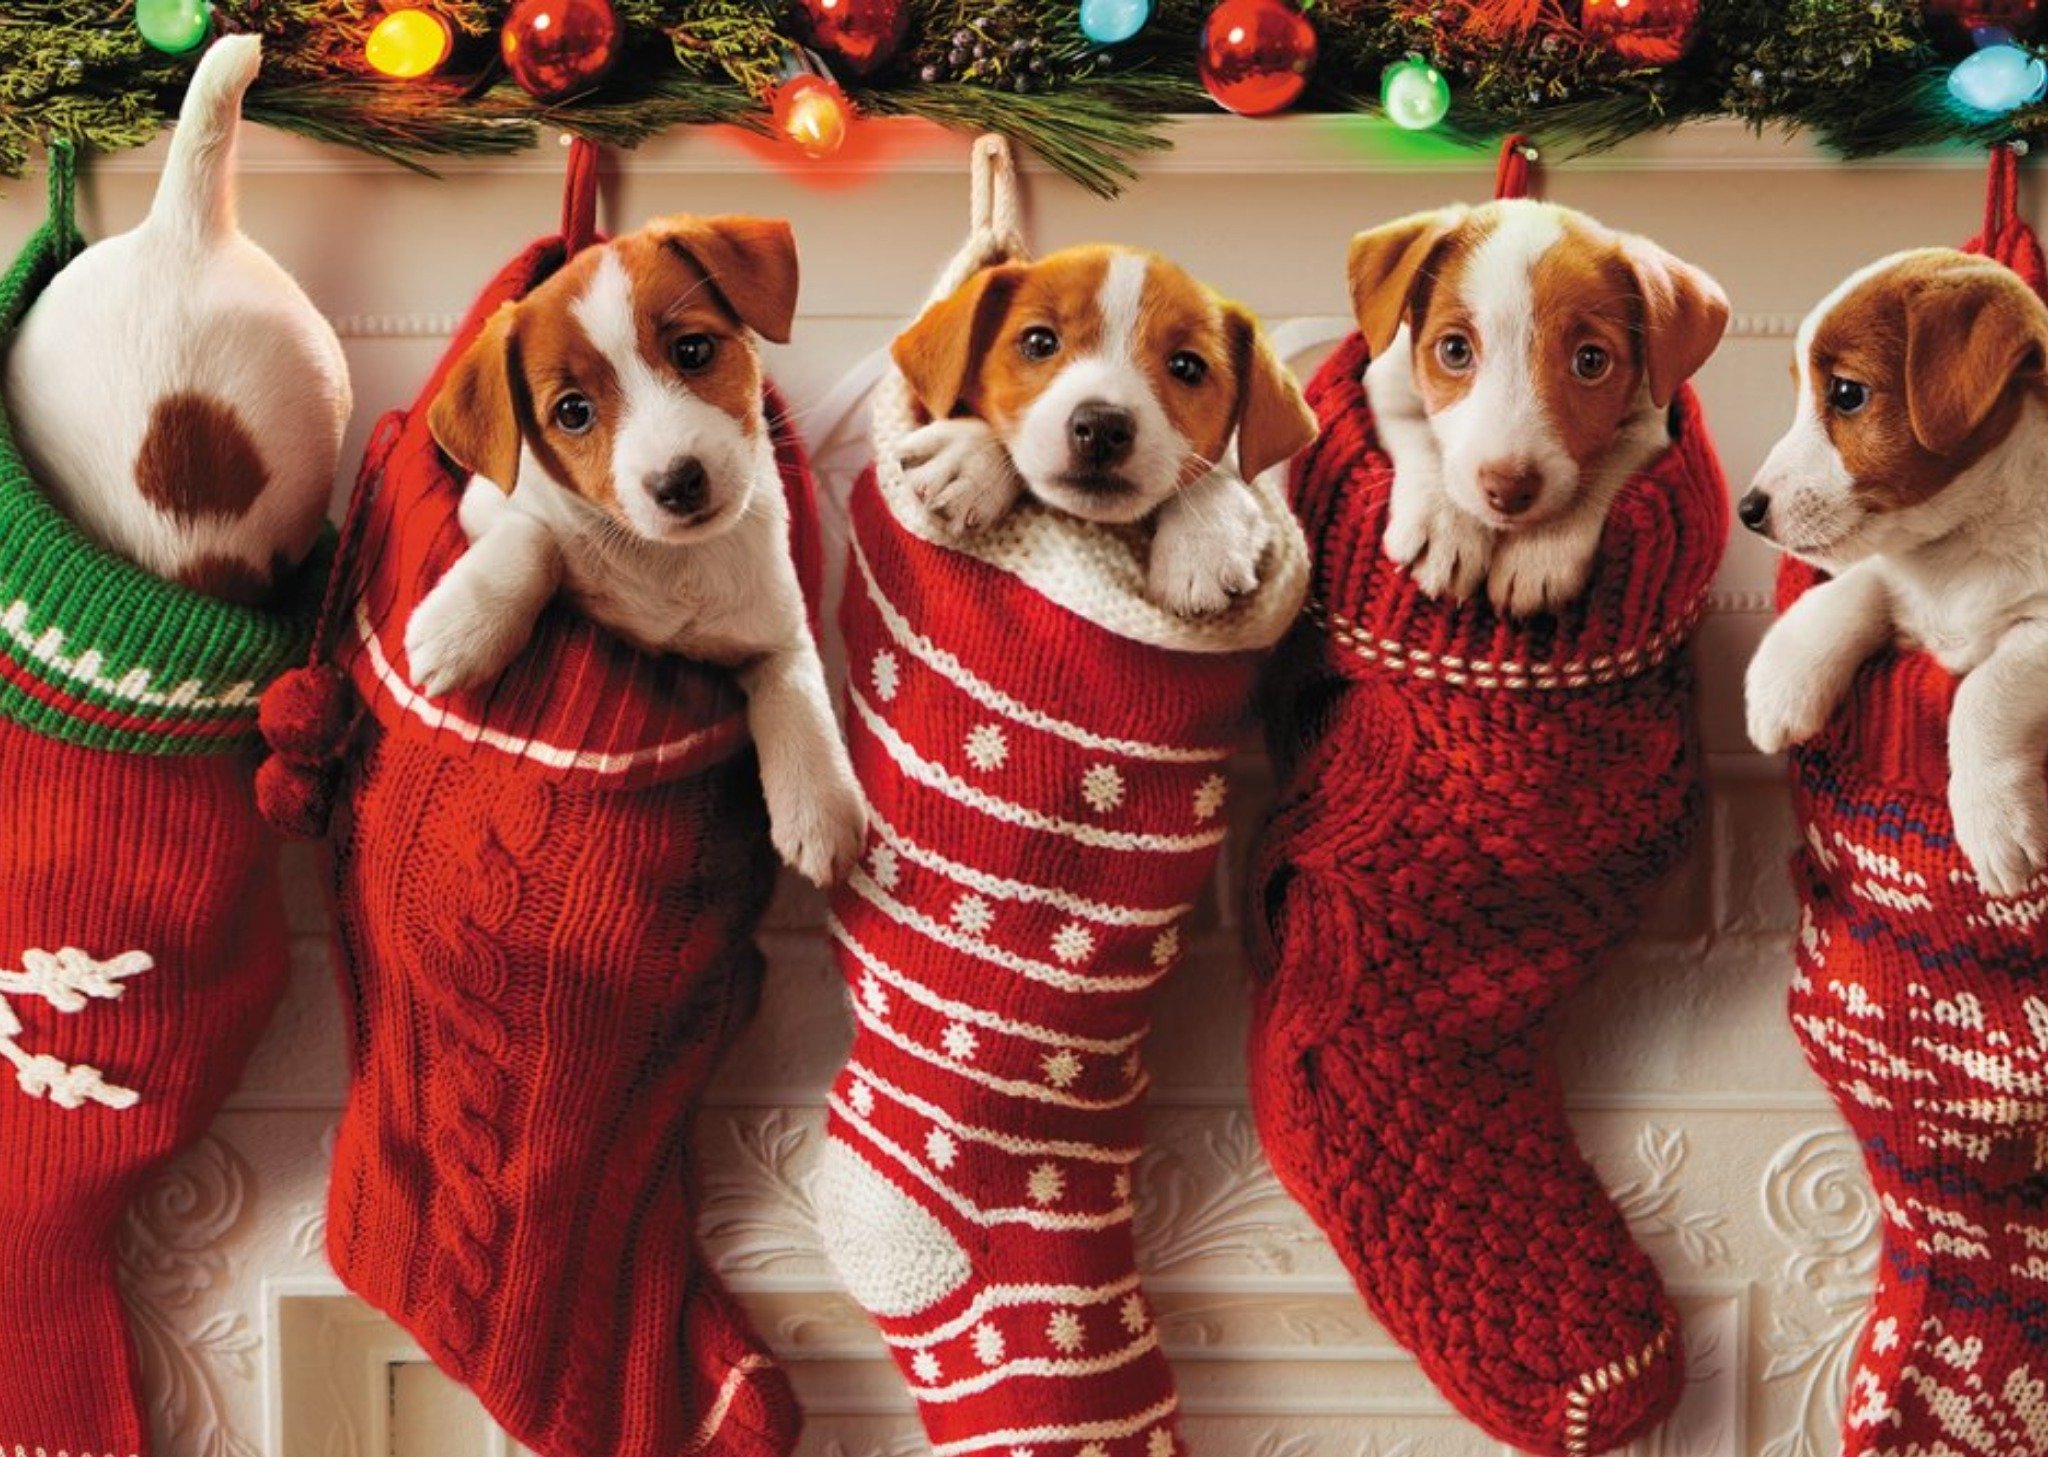 Moonpig Puppies In Stockings Christmas Card Ecard